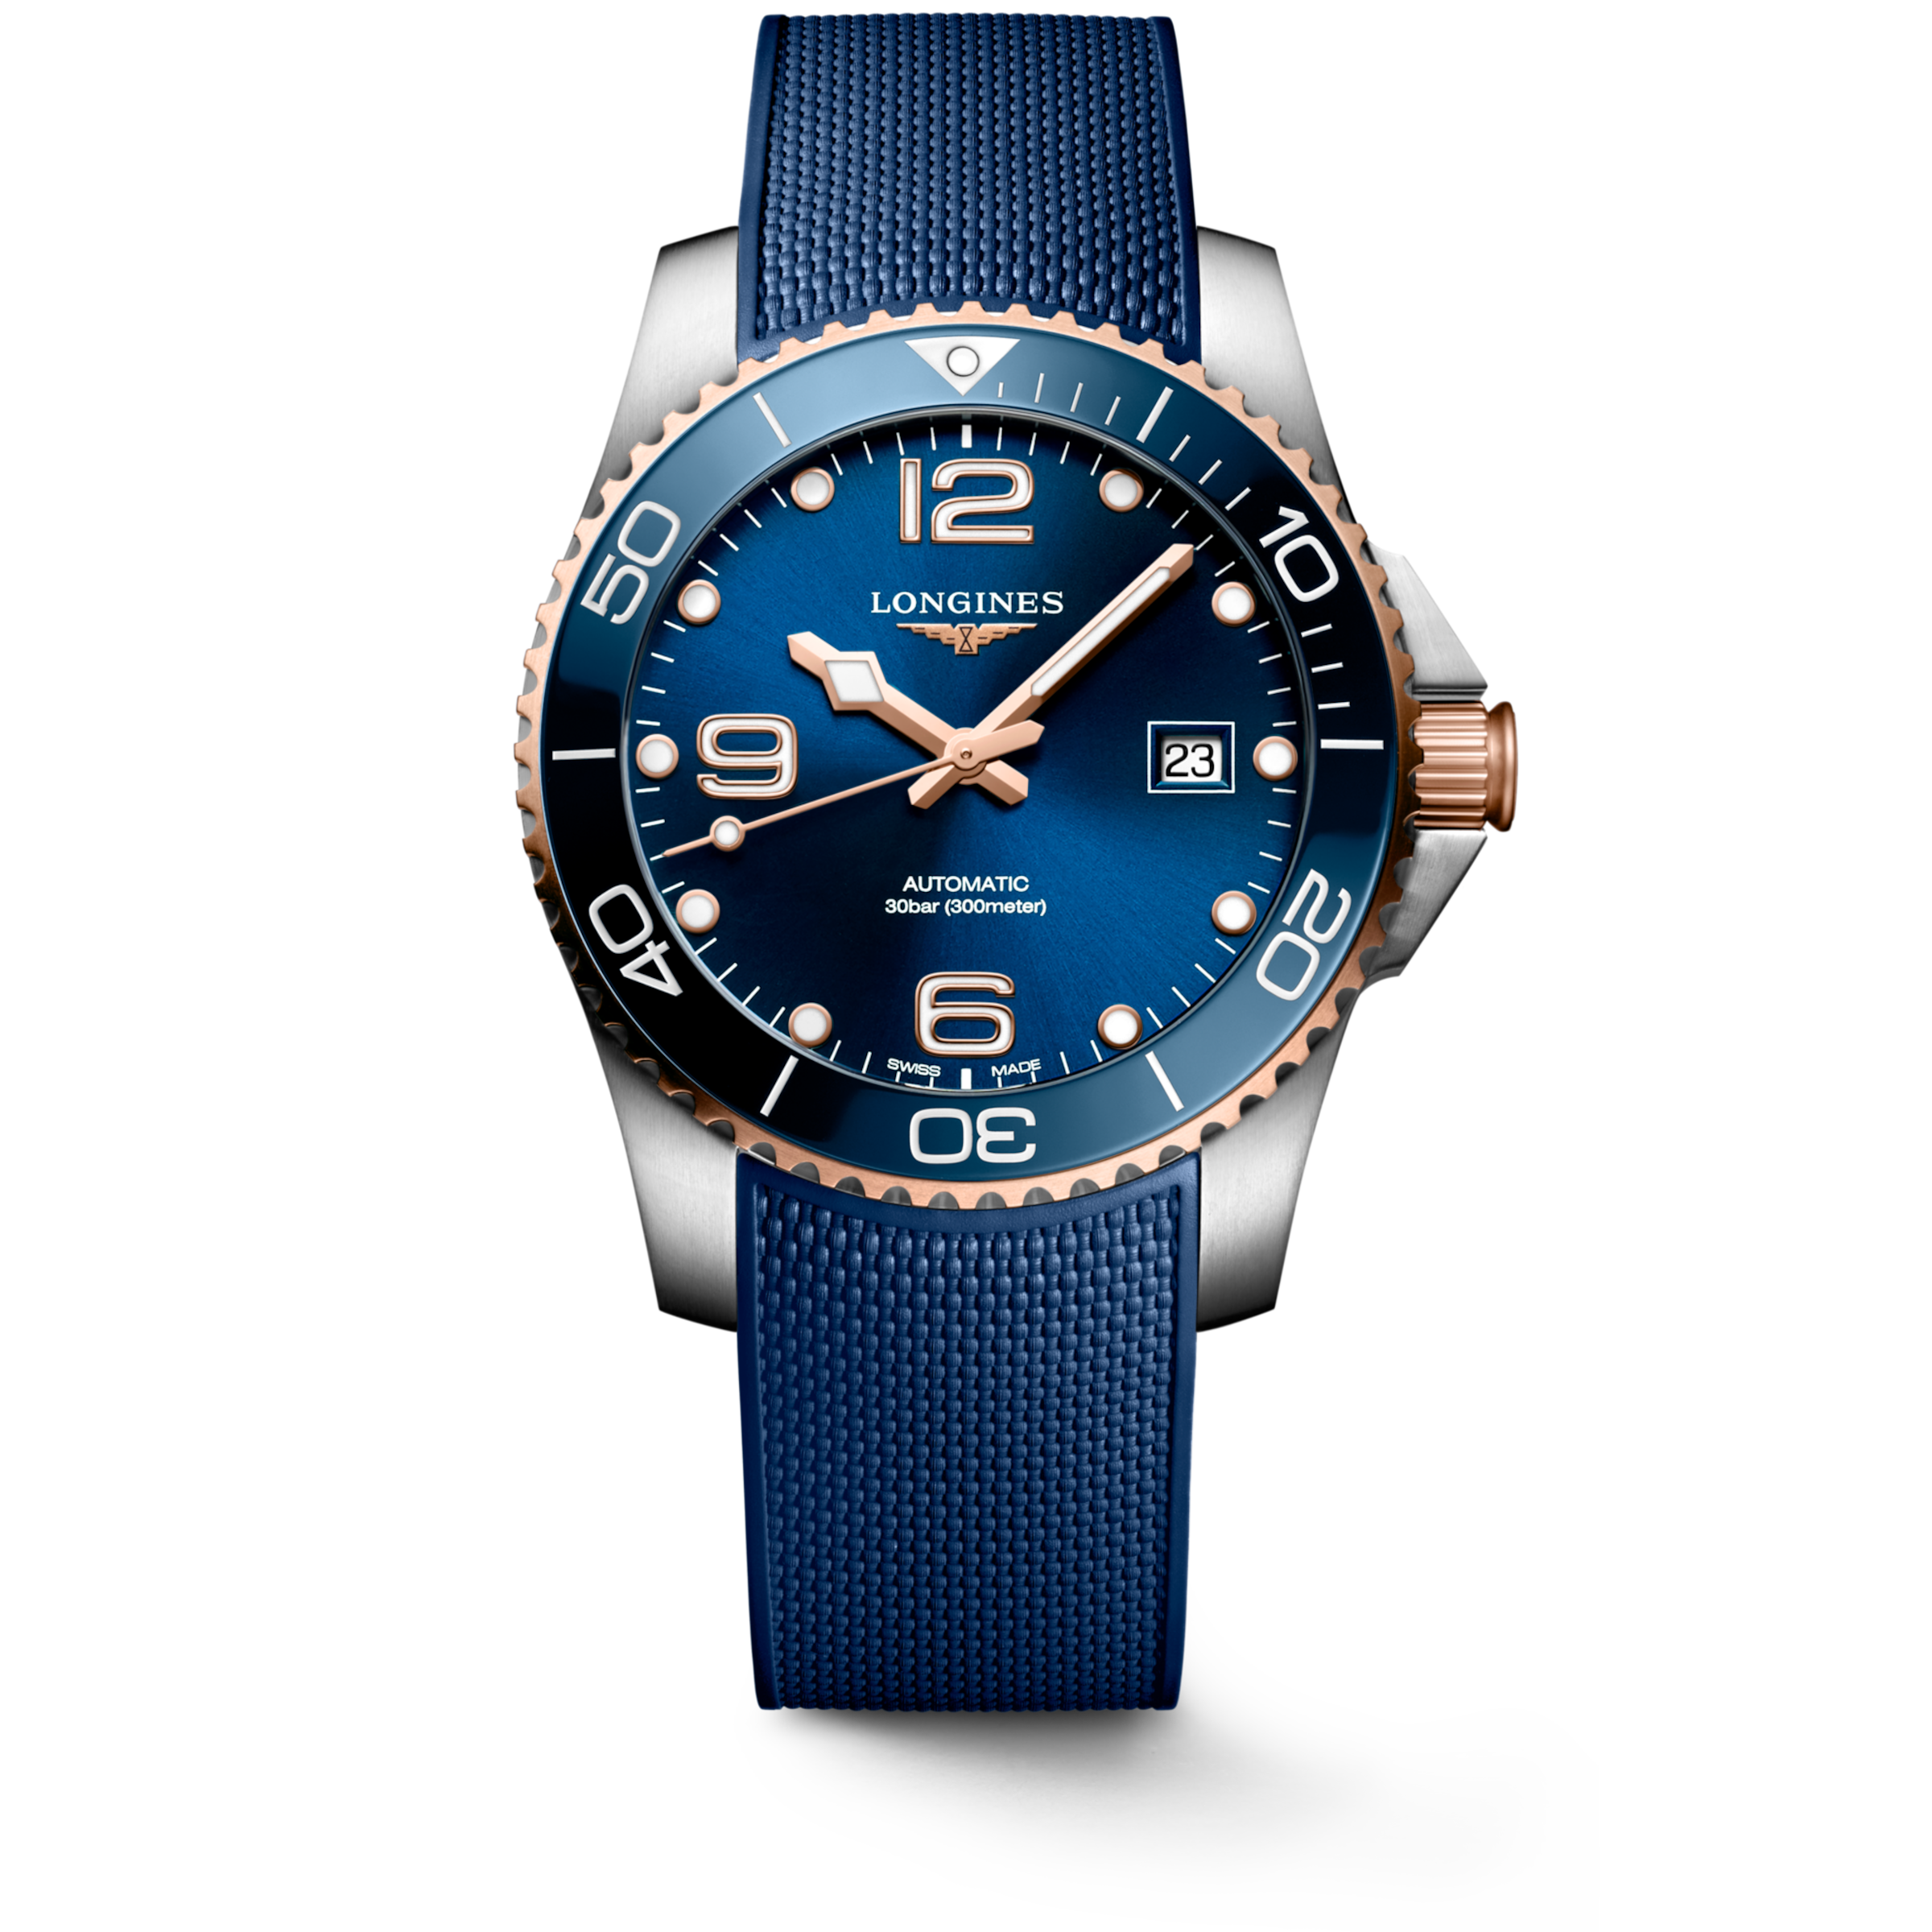 Longines HYDROCONQUEST Automatic Stainless steel and ceramic bezel Watch - L3.781.3.98.9